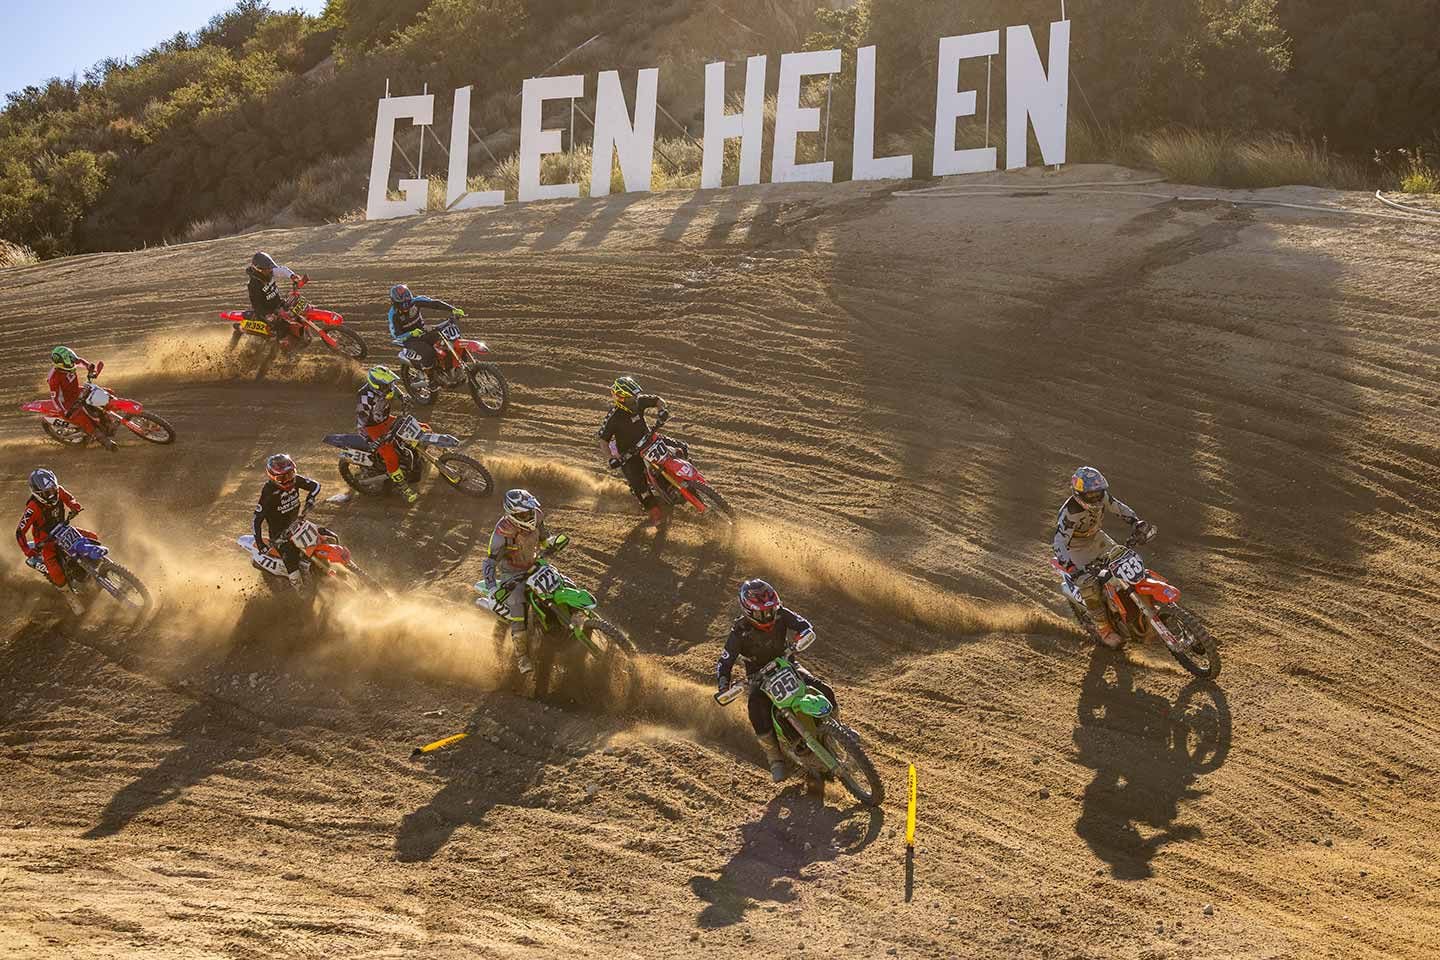 Glen Helen Raceway’s banked “Talladega” style turn 1 is one of the fastest and most exhilarating in motocross racing.